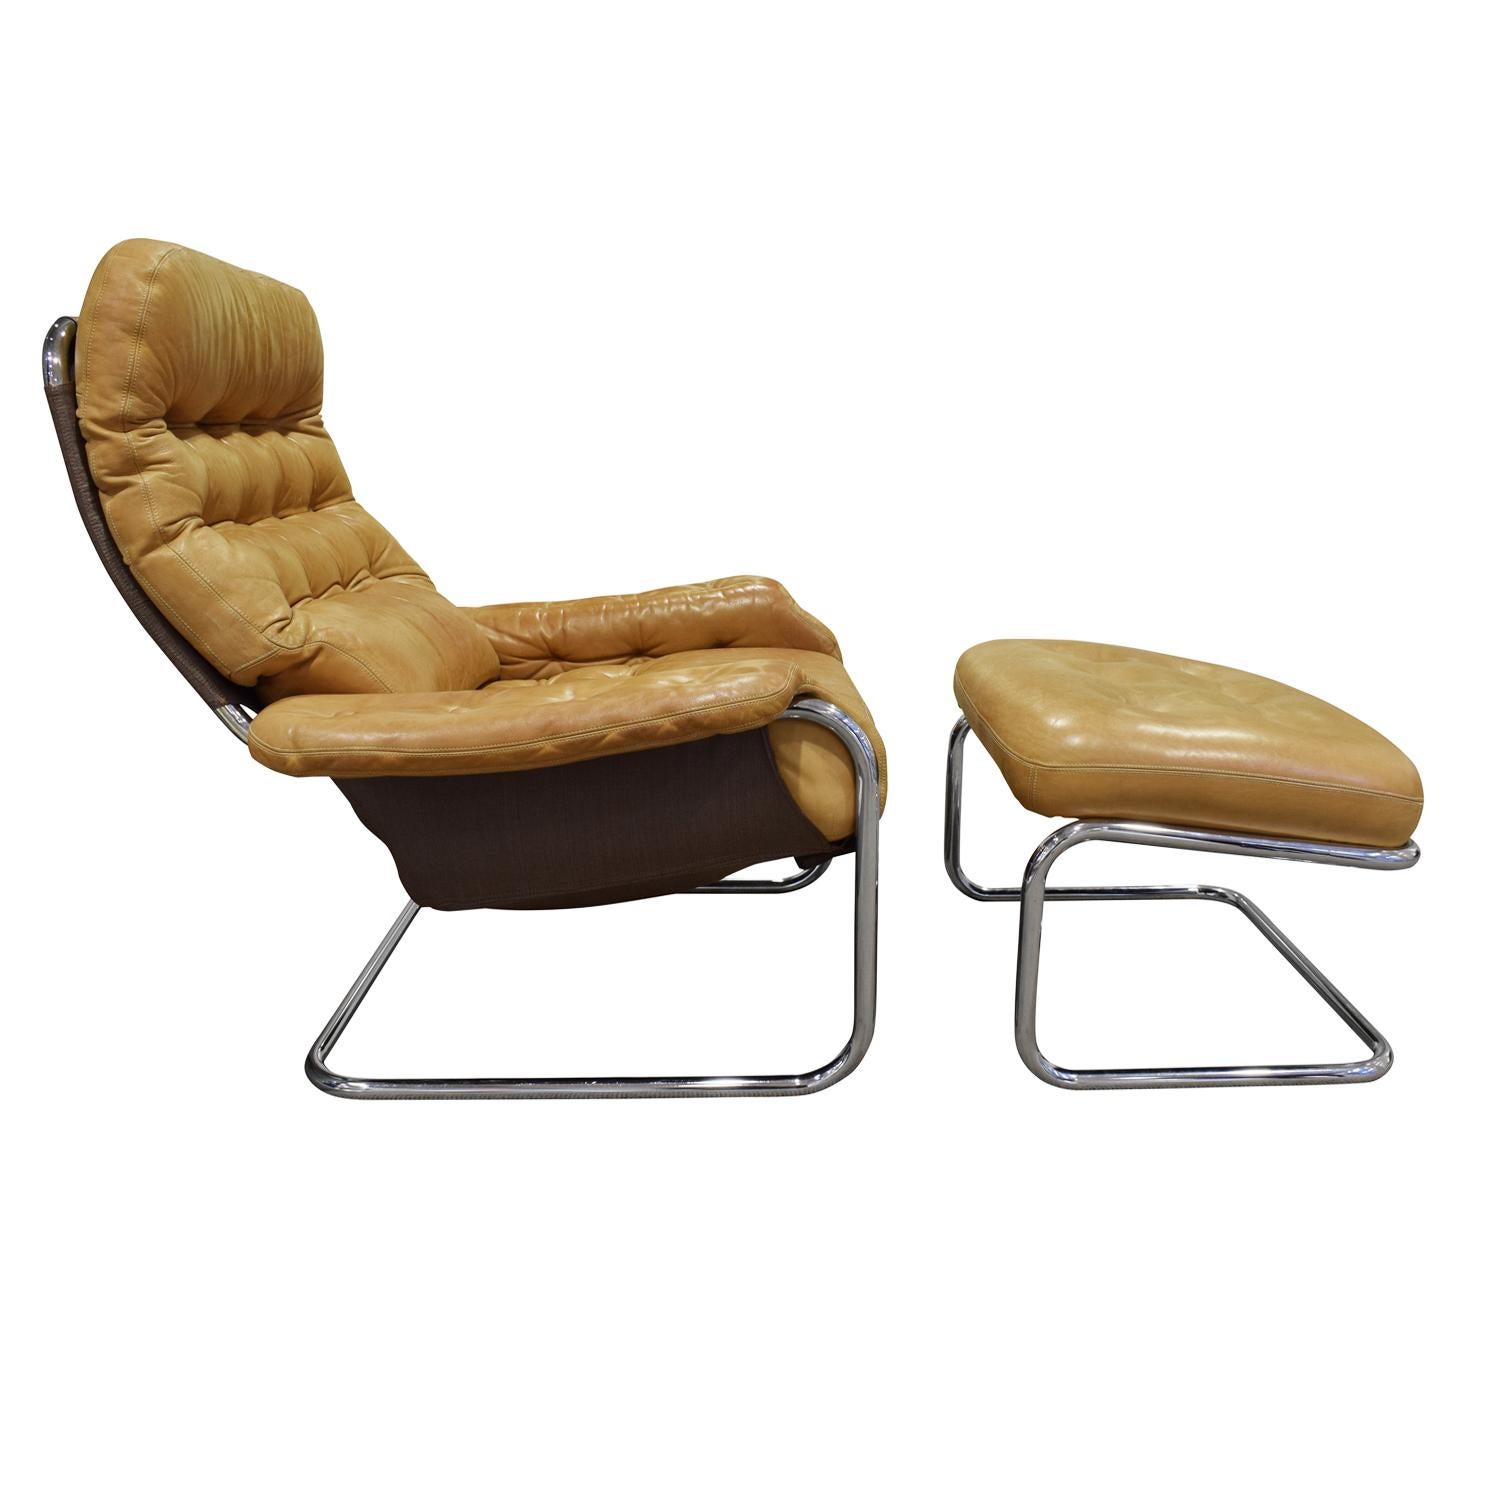 Lounge chair and ottoman in polished chrome with button tufted leather upholstery by DUX, Sweden, 1980s. This chair is chic and very comfortable.

Ottoman dimensions:

W 23.5 inches
D 19.5 inches
H 16 inches.